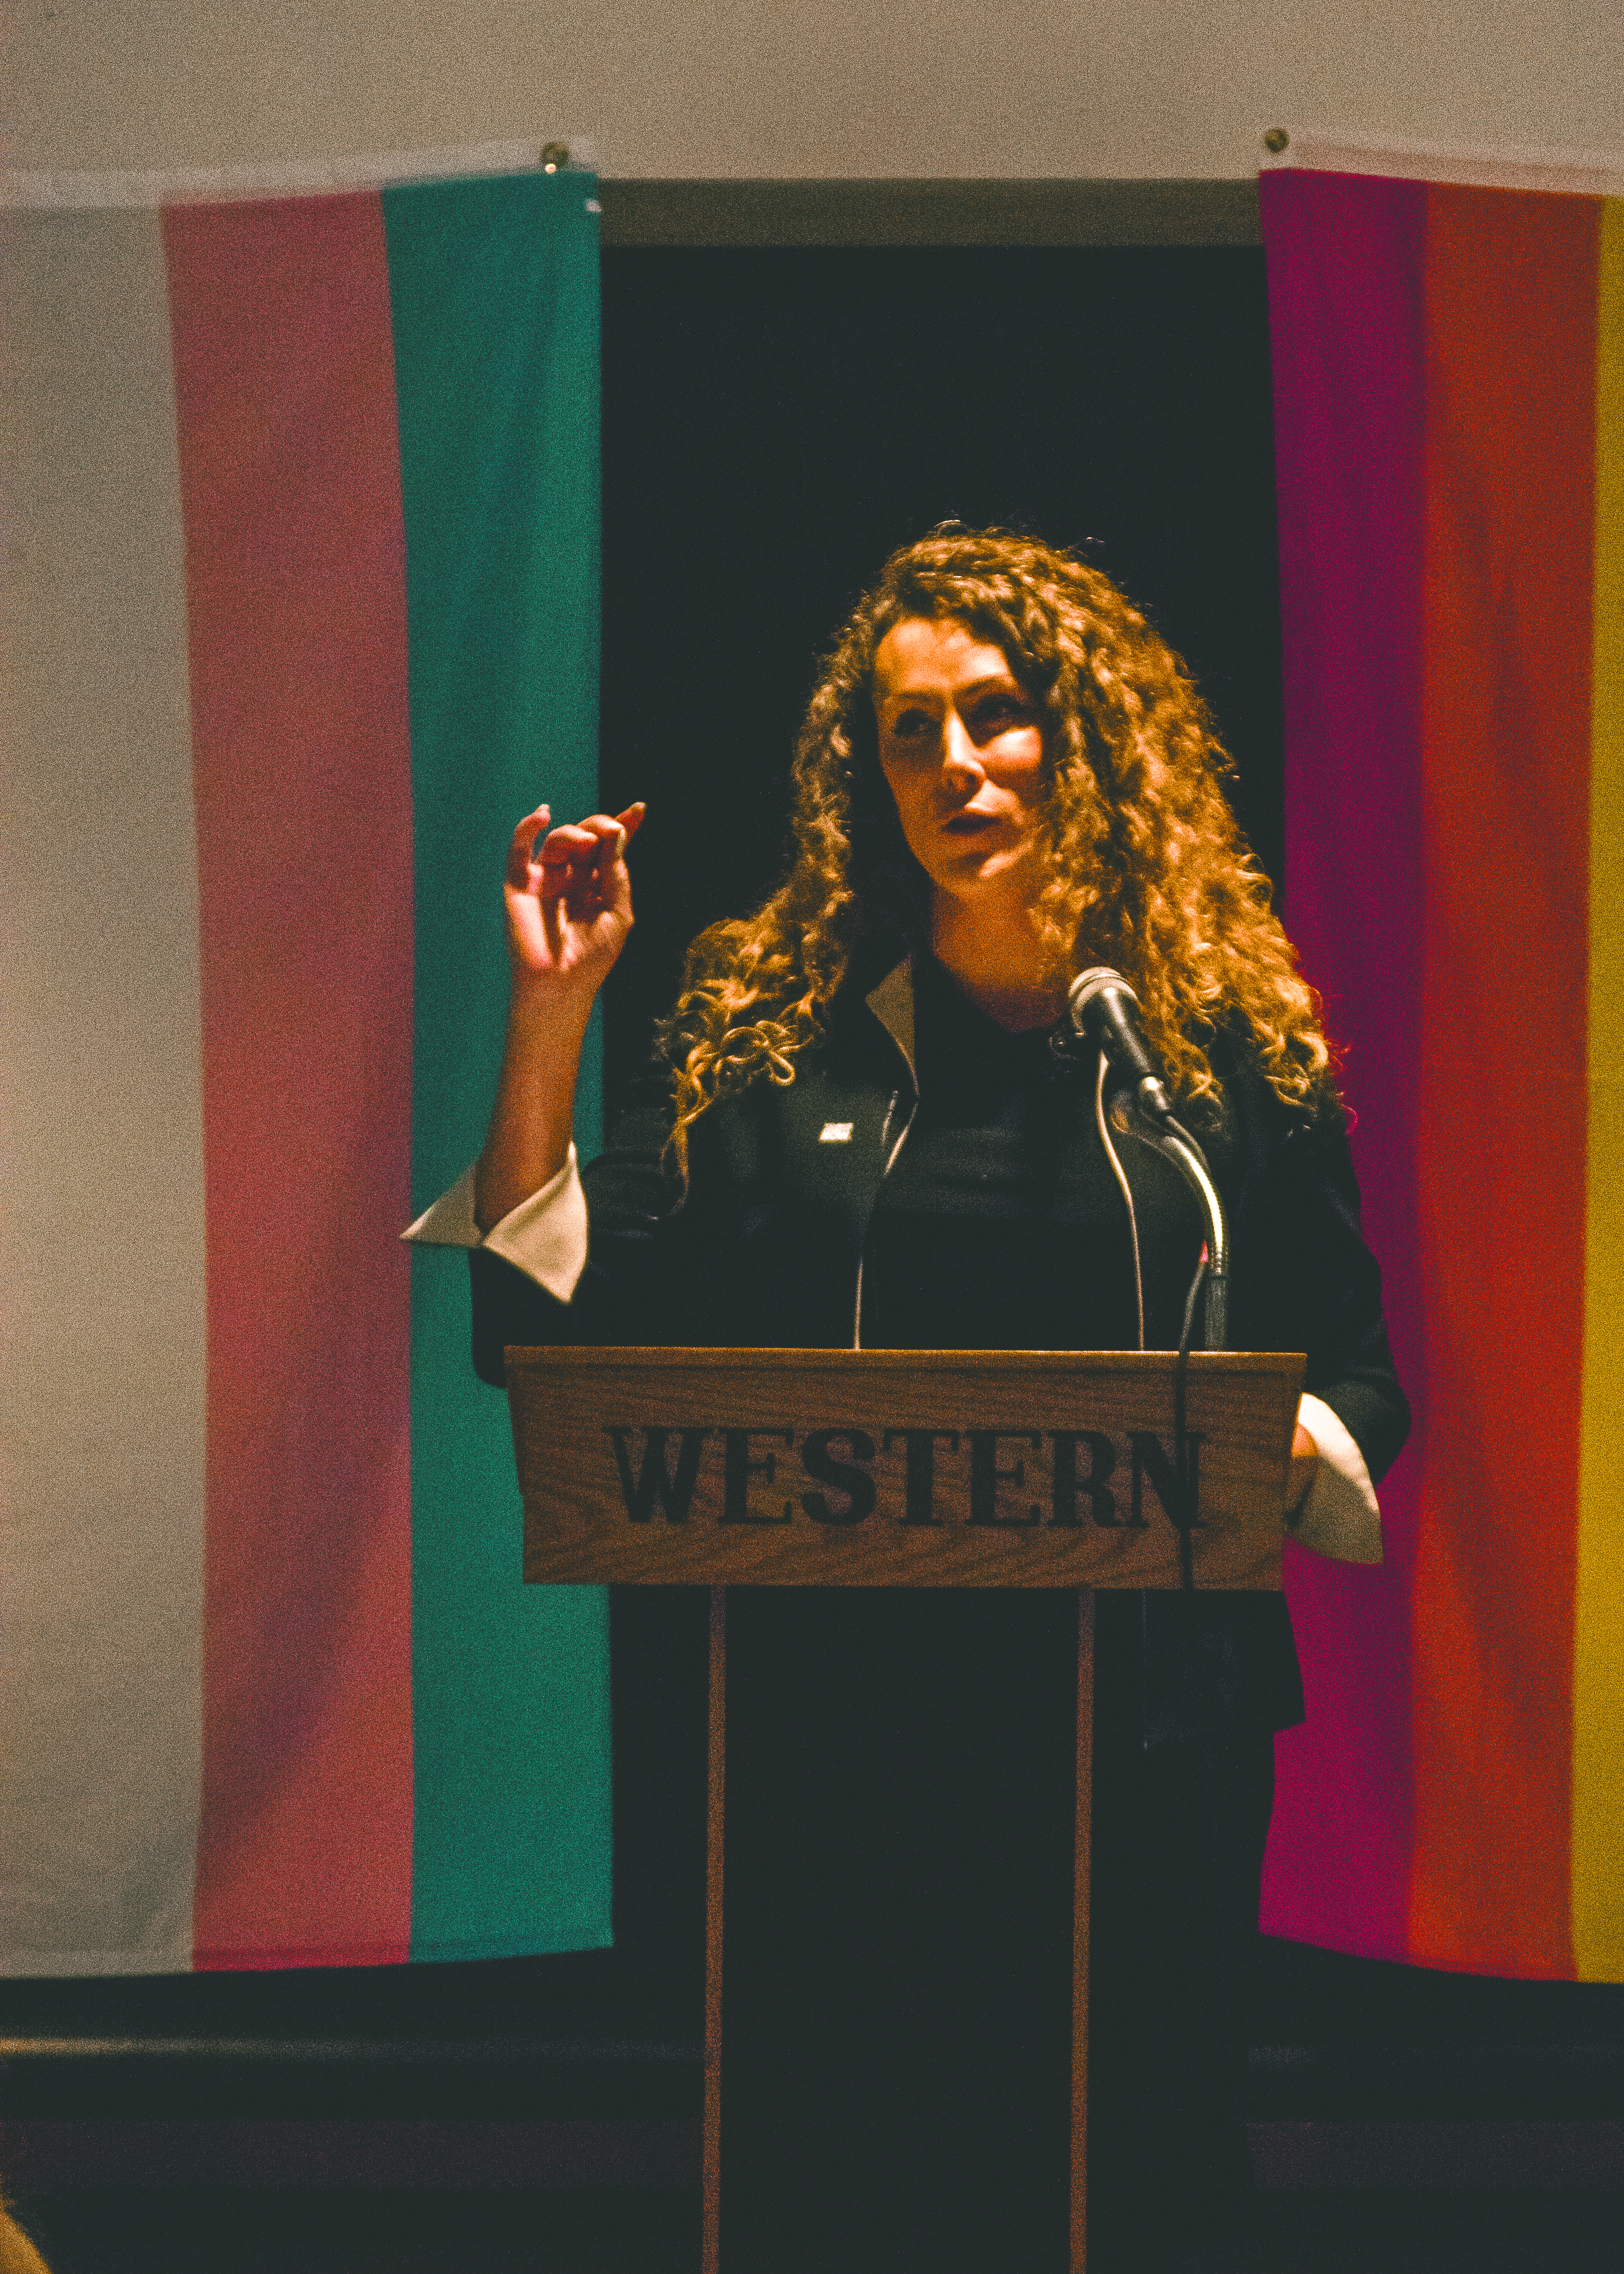 LGBTQ+ activist encourages honesty and bravery